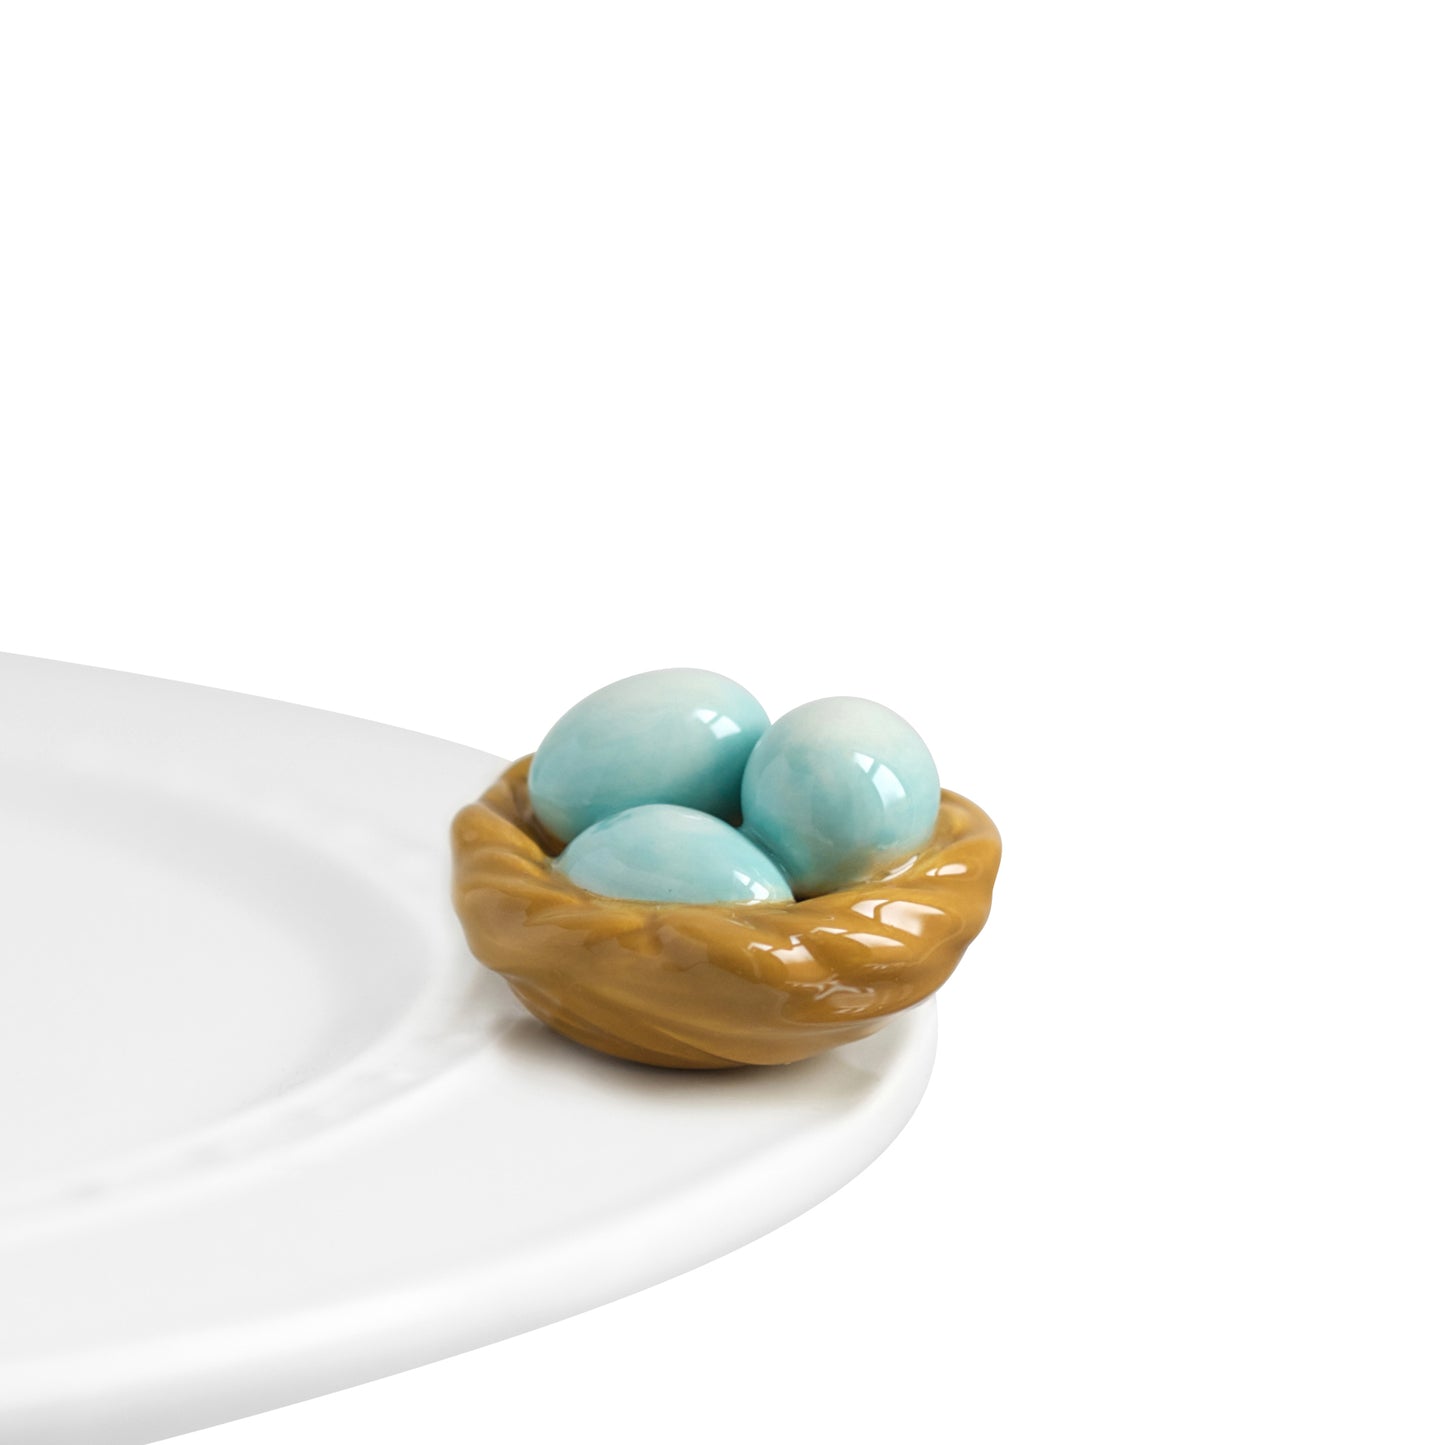 Nora Fleming Robin's Egg blue mini basket with three blue eggs. Shop at The Painted Cottage in Edgewater, MD.